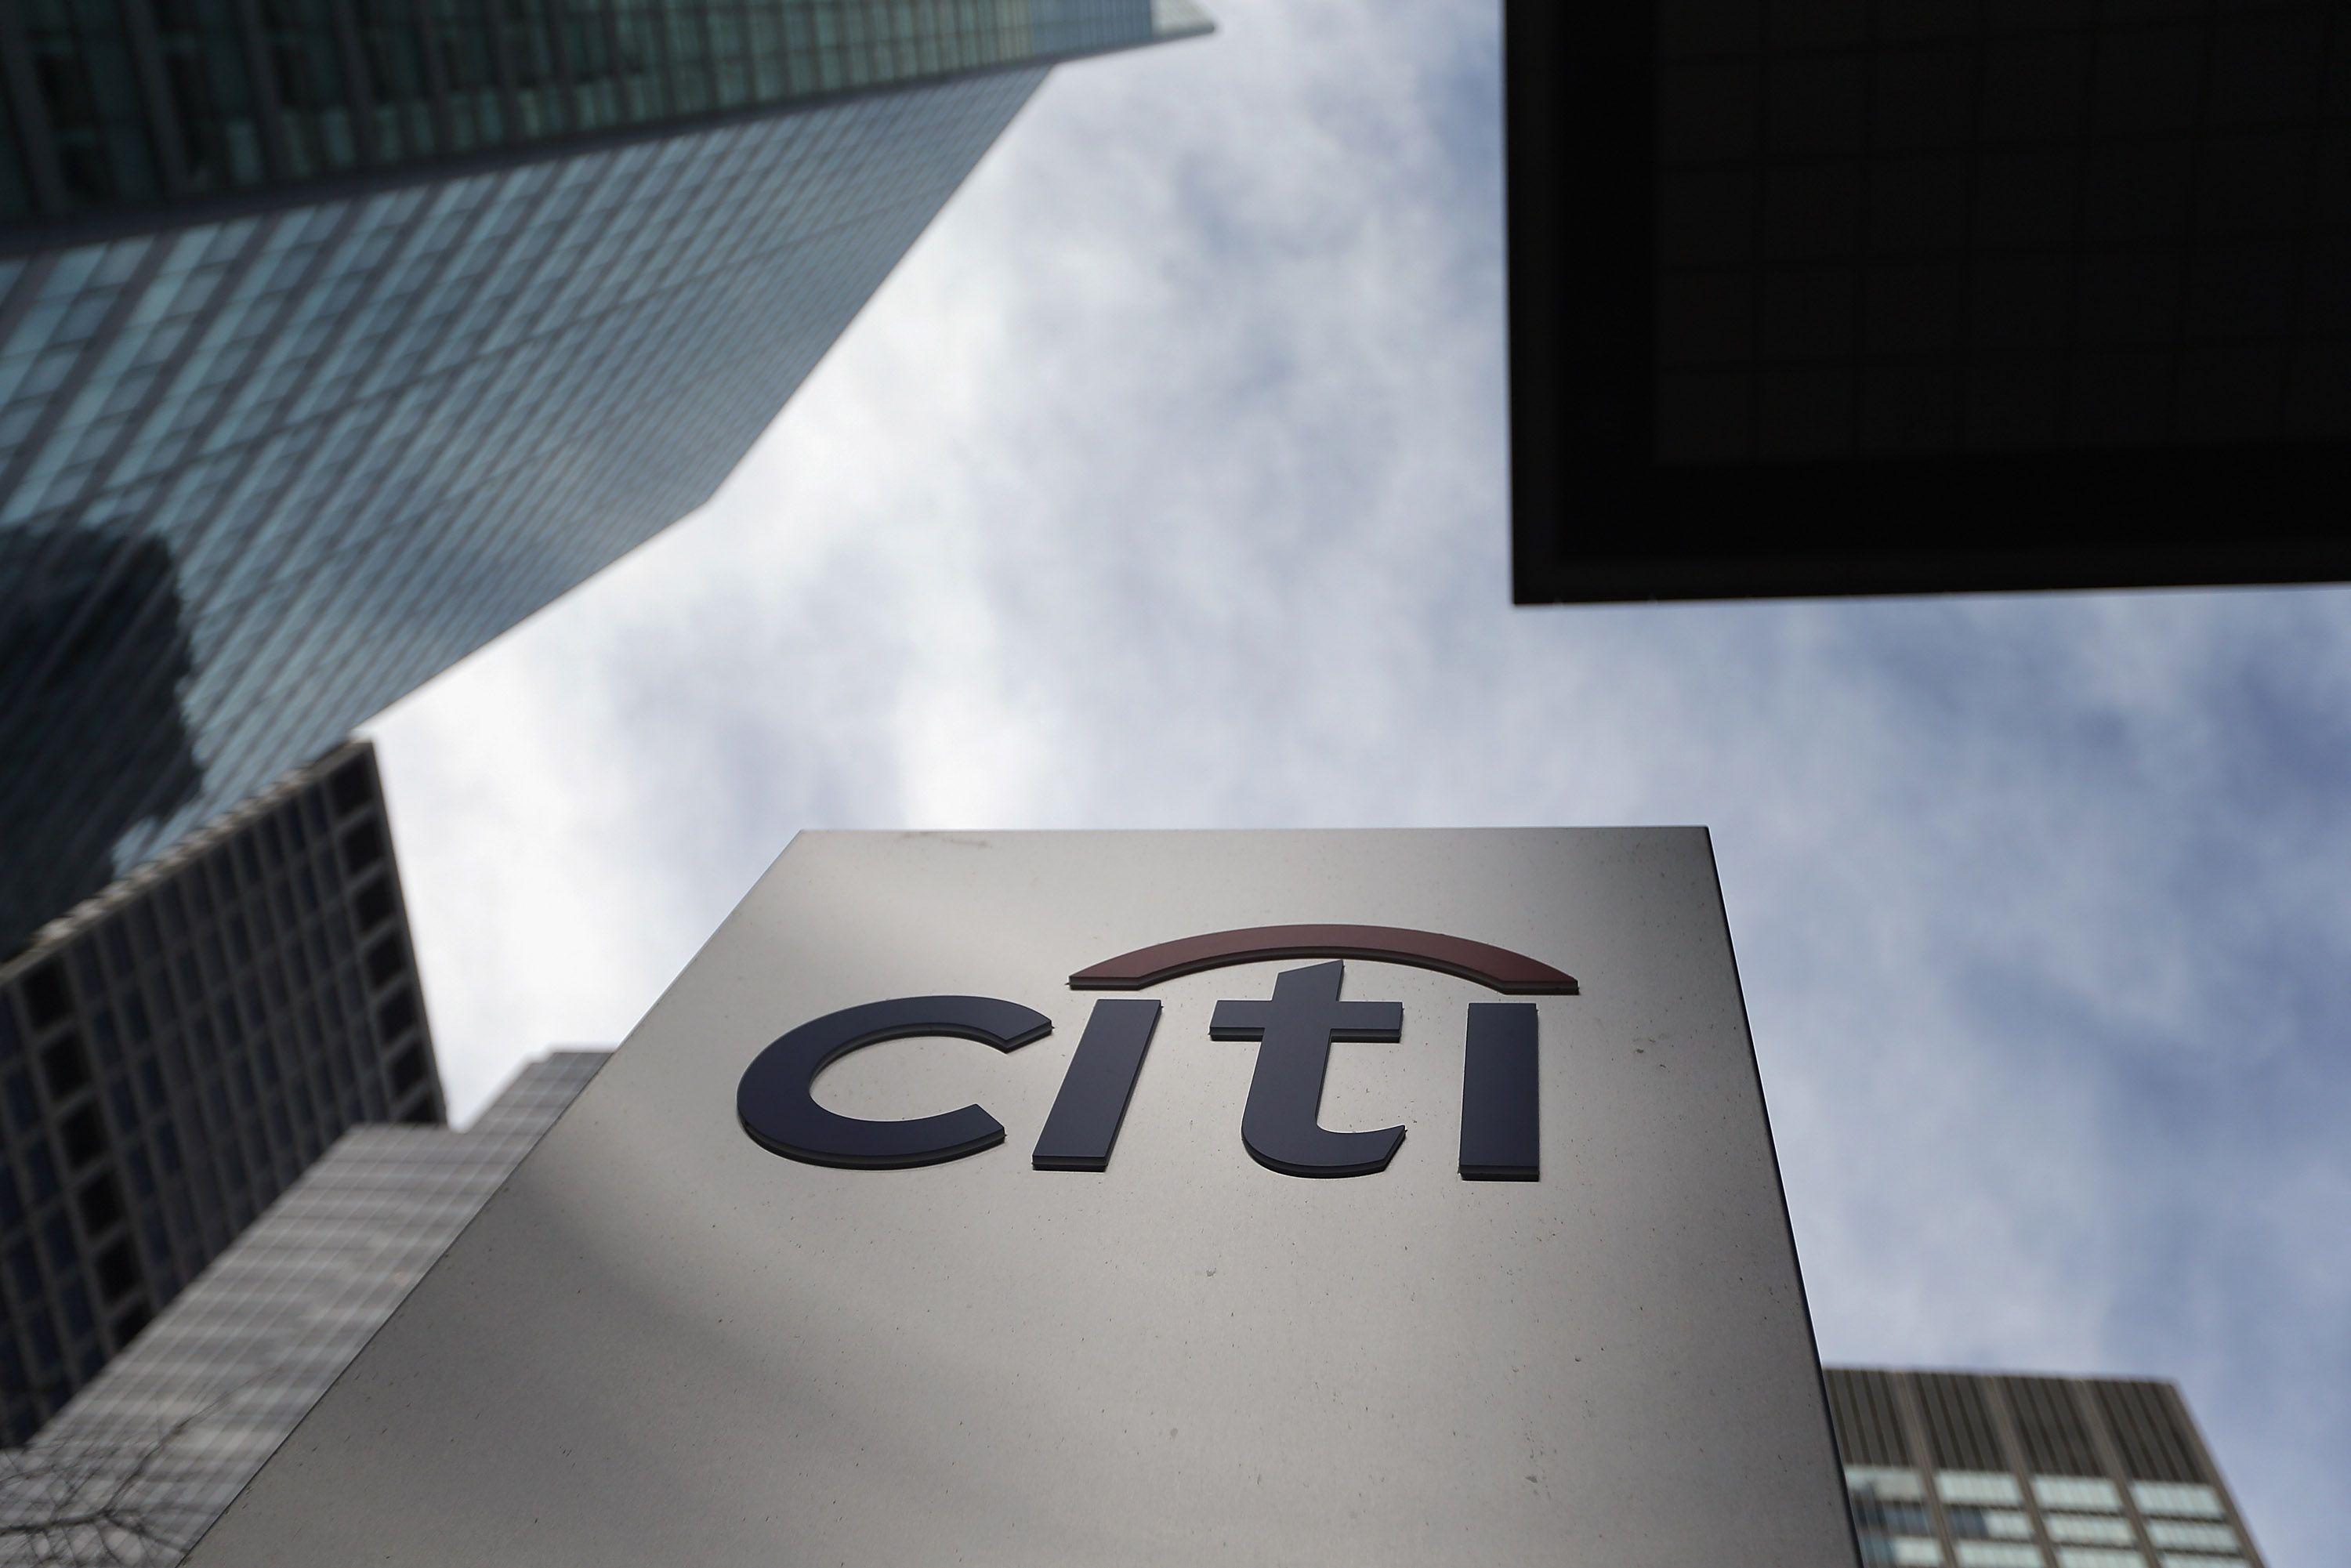 Citi Research Logo - Citigroup Fined for Telling Clients to Buy When It Meant Sell | Fortune